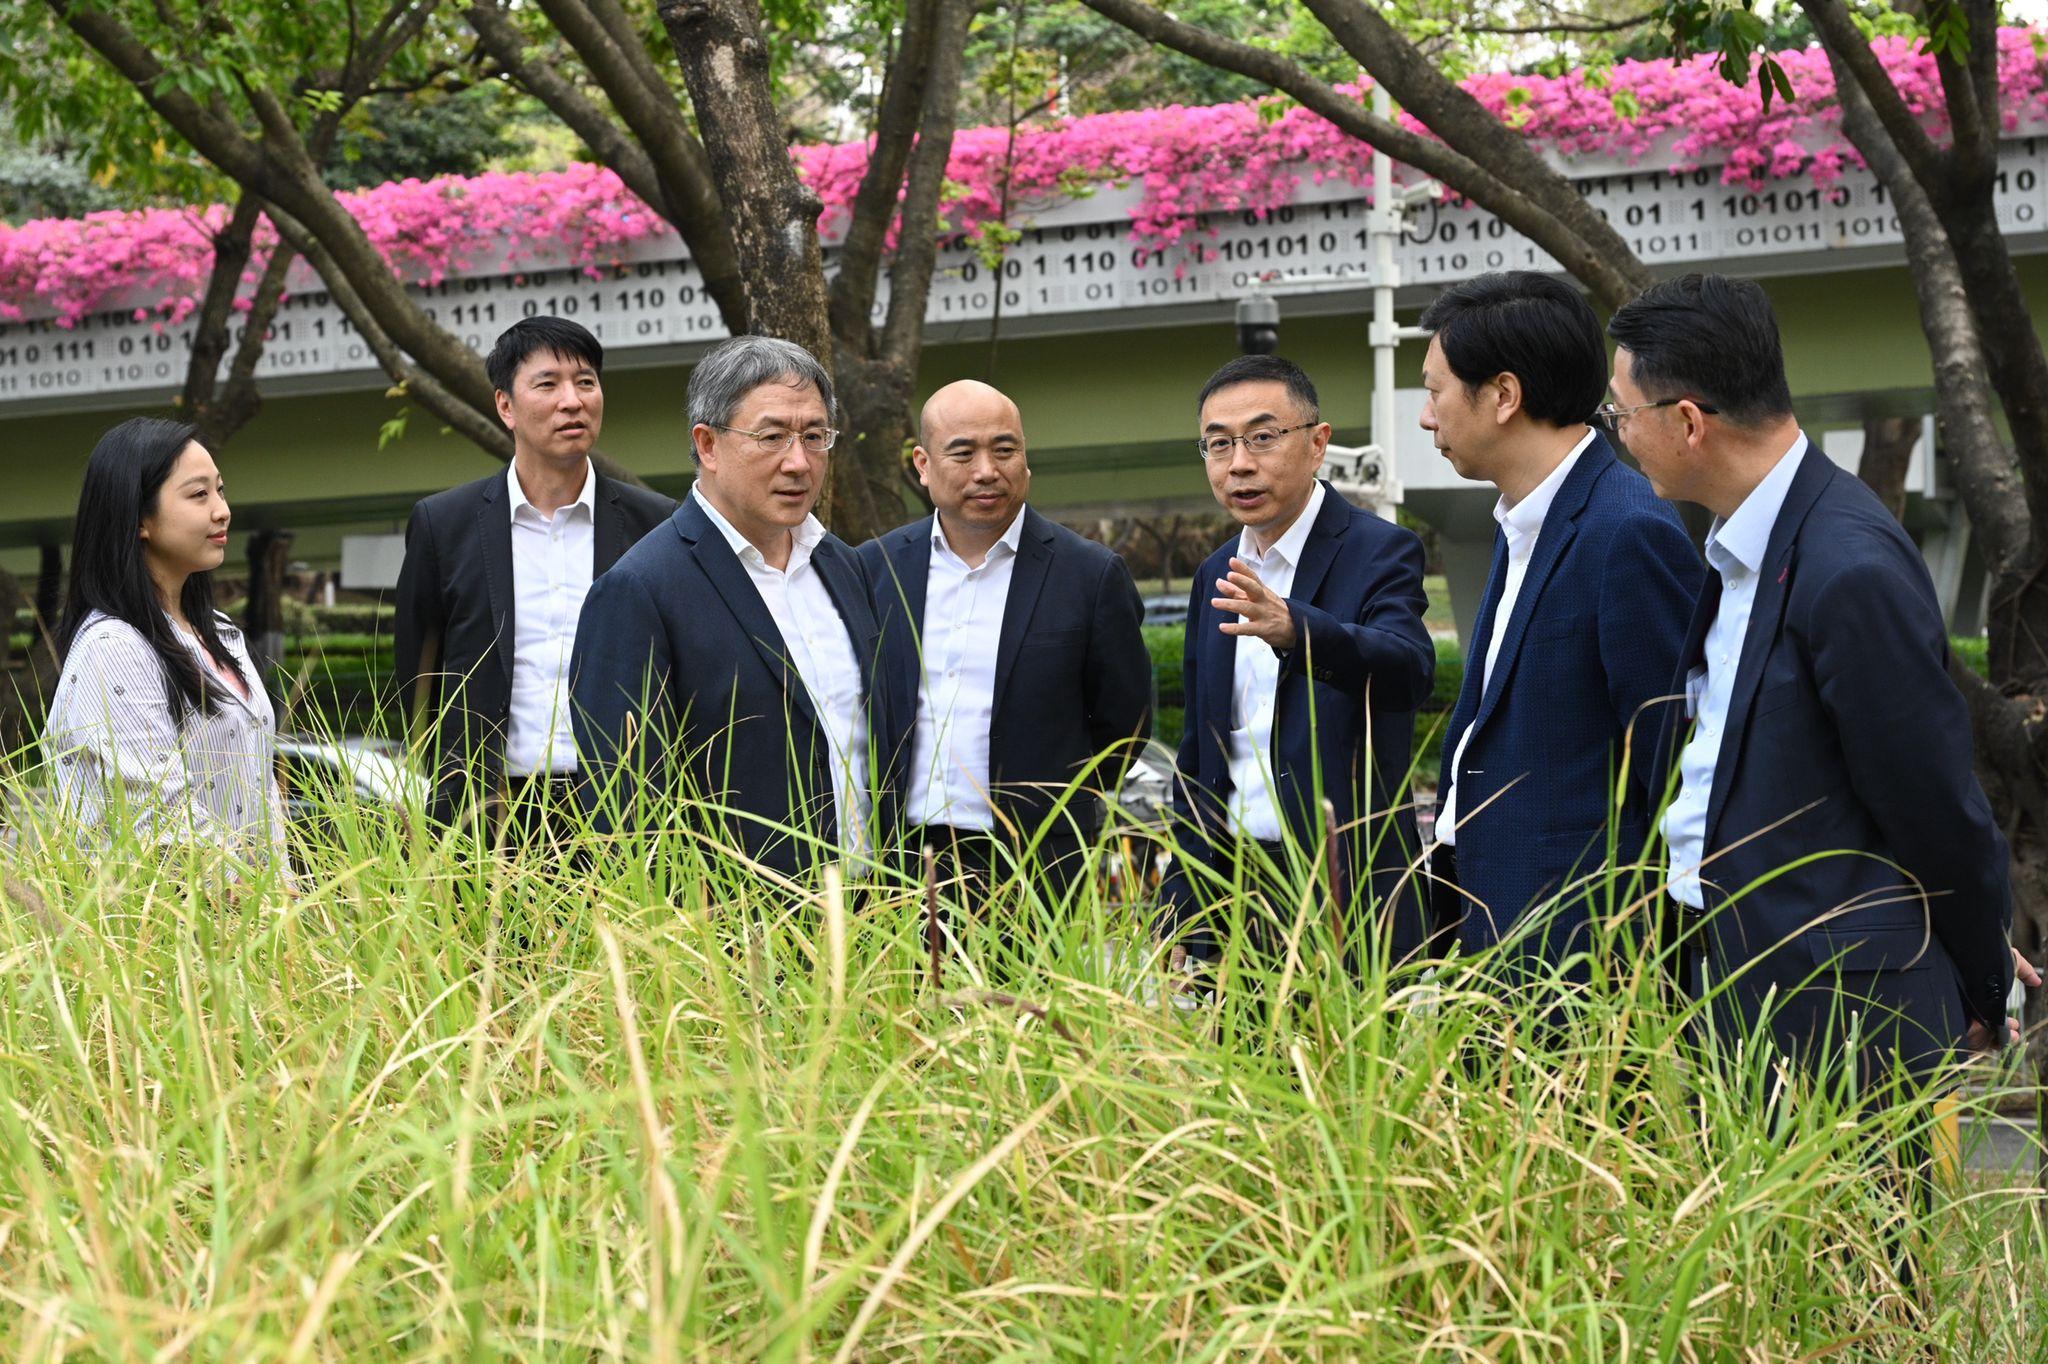 The Deputy Chief Secretary for Administration, Mr Cheuk Wing-hing (third left), together with the Director of Highways, Mr Jimmy Chan (second left), and the Director of Leisure and Cultural Services, Mr Vincent Liu (first right), visited Dasha River Ecological Corridor in Shenzhen today (March 23) to learn how the Shenzhen Government carried out riverside greening and enhancement works.